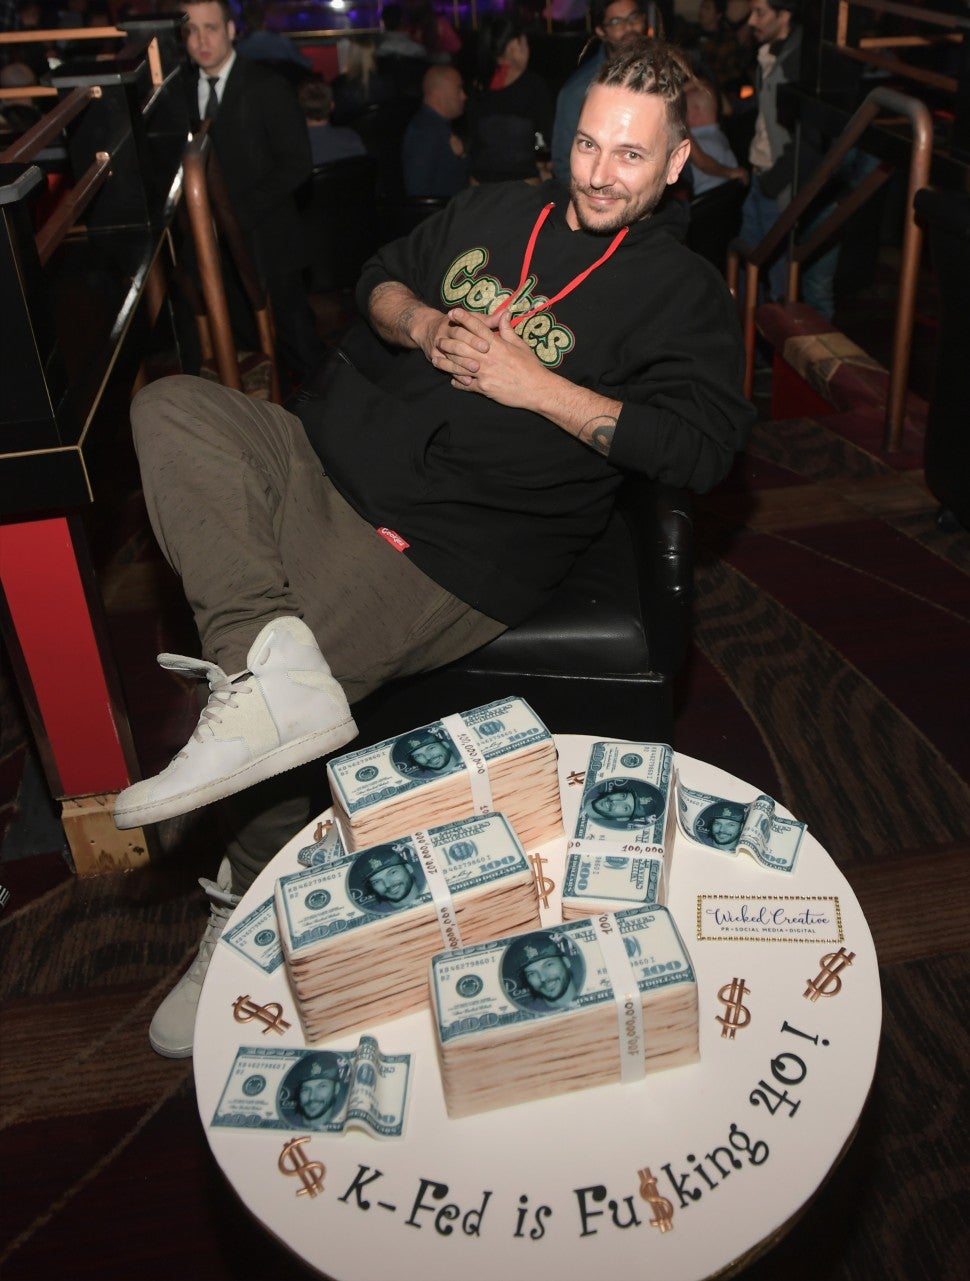 Kevin Federline celebrates his birthday at the Crazy Horse III Gentlemen's Club on March 24, 2018 in Las Vegas, Nevada.